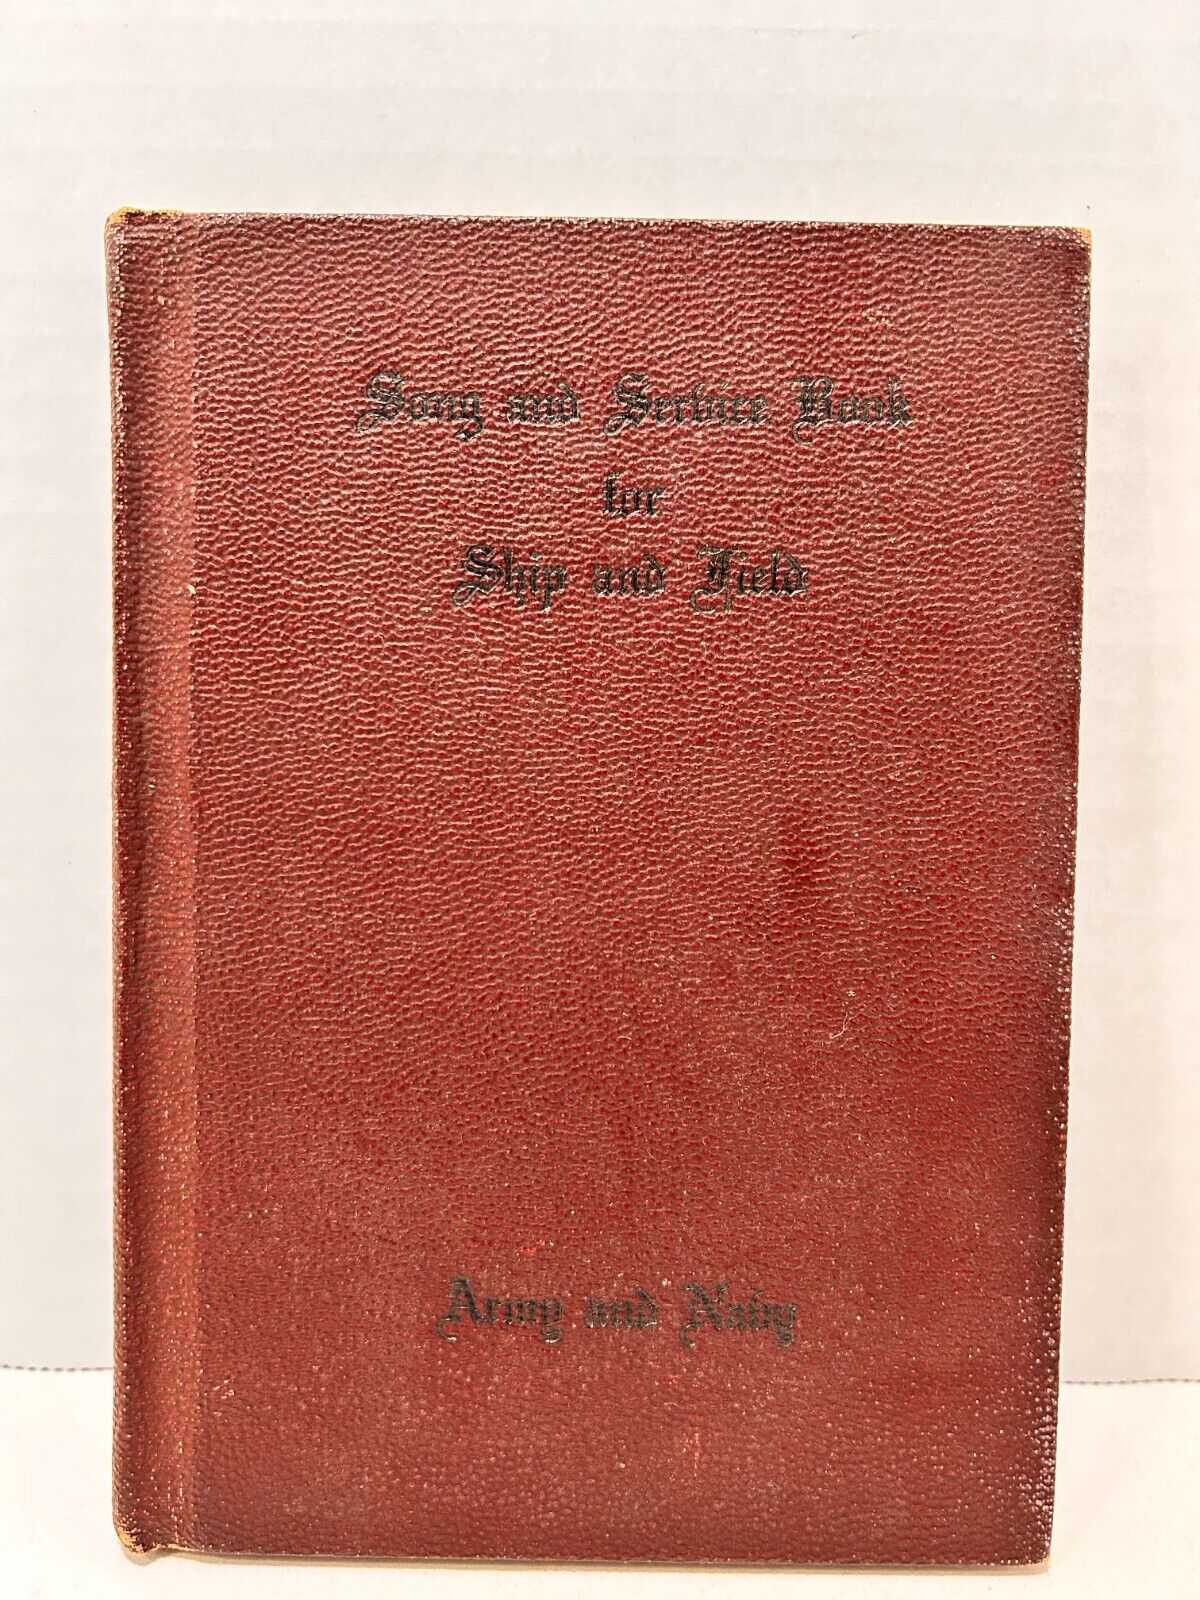 Vintage Song and Service Book For Ship & Field Army and Navy HC 1942